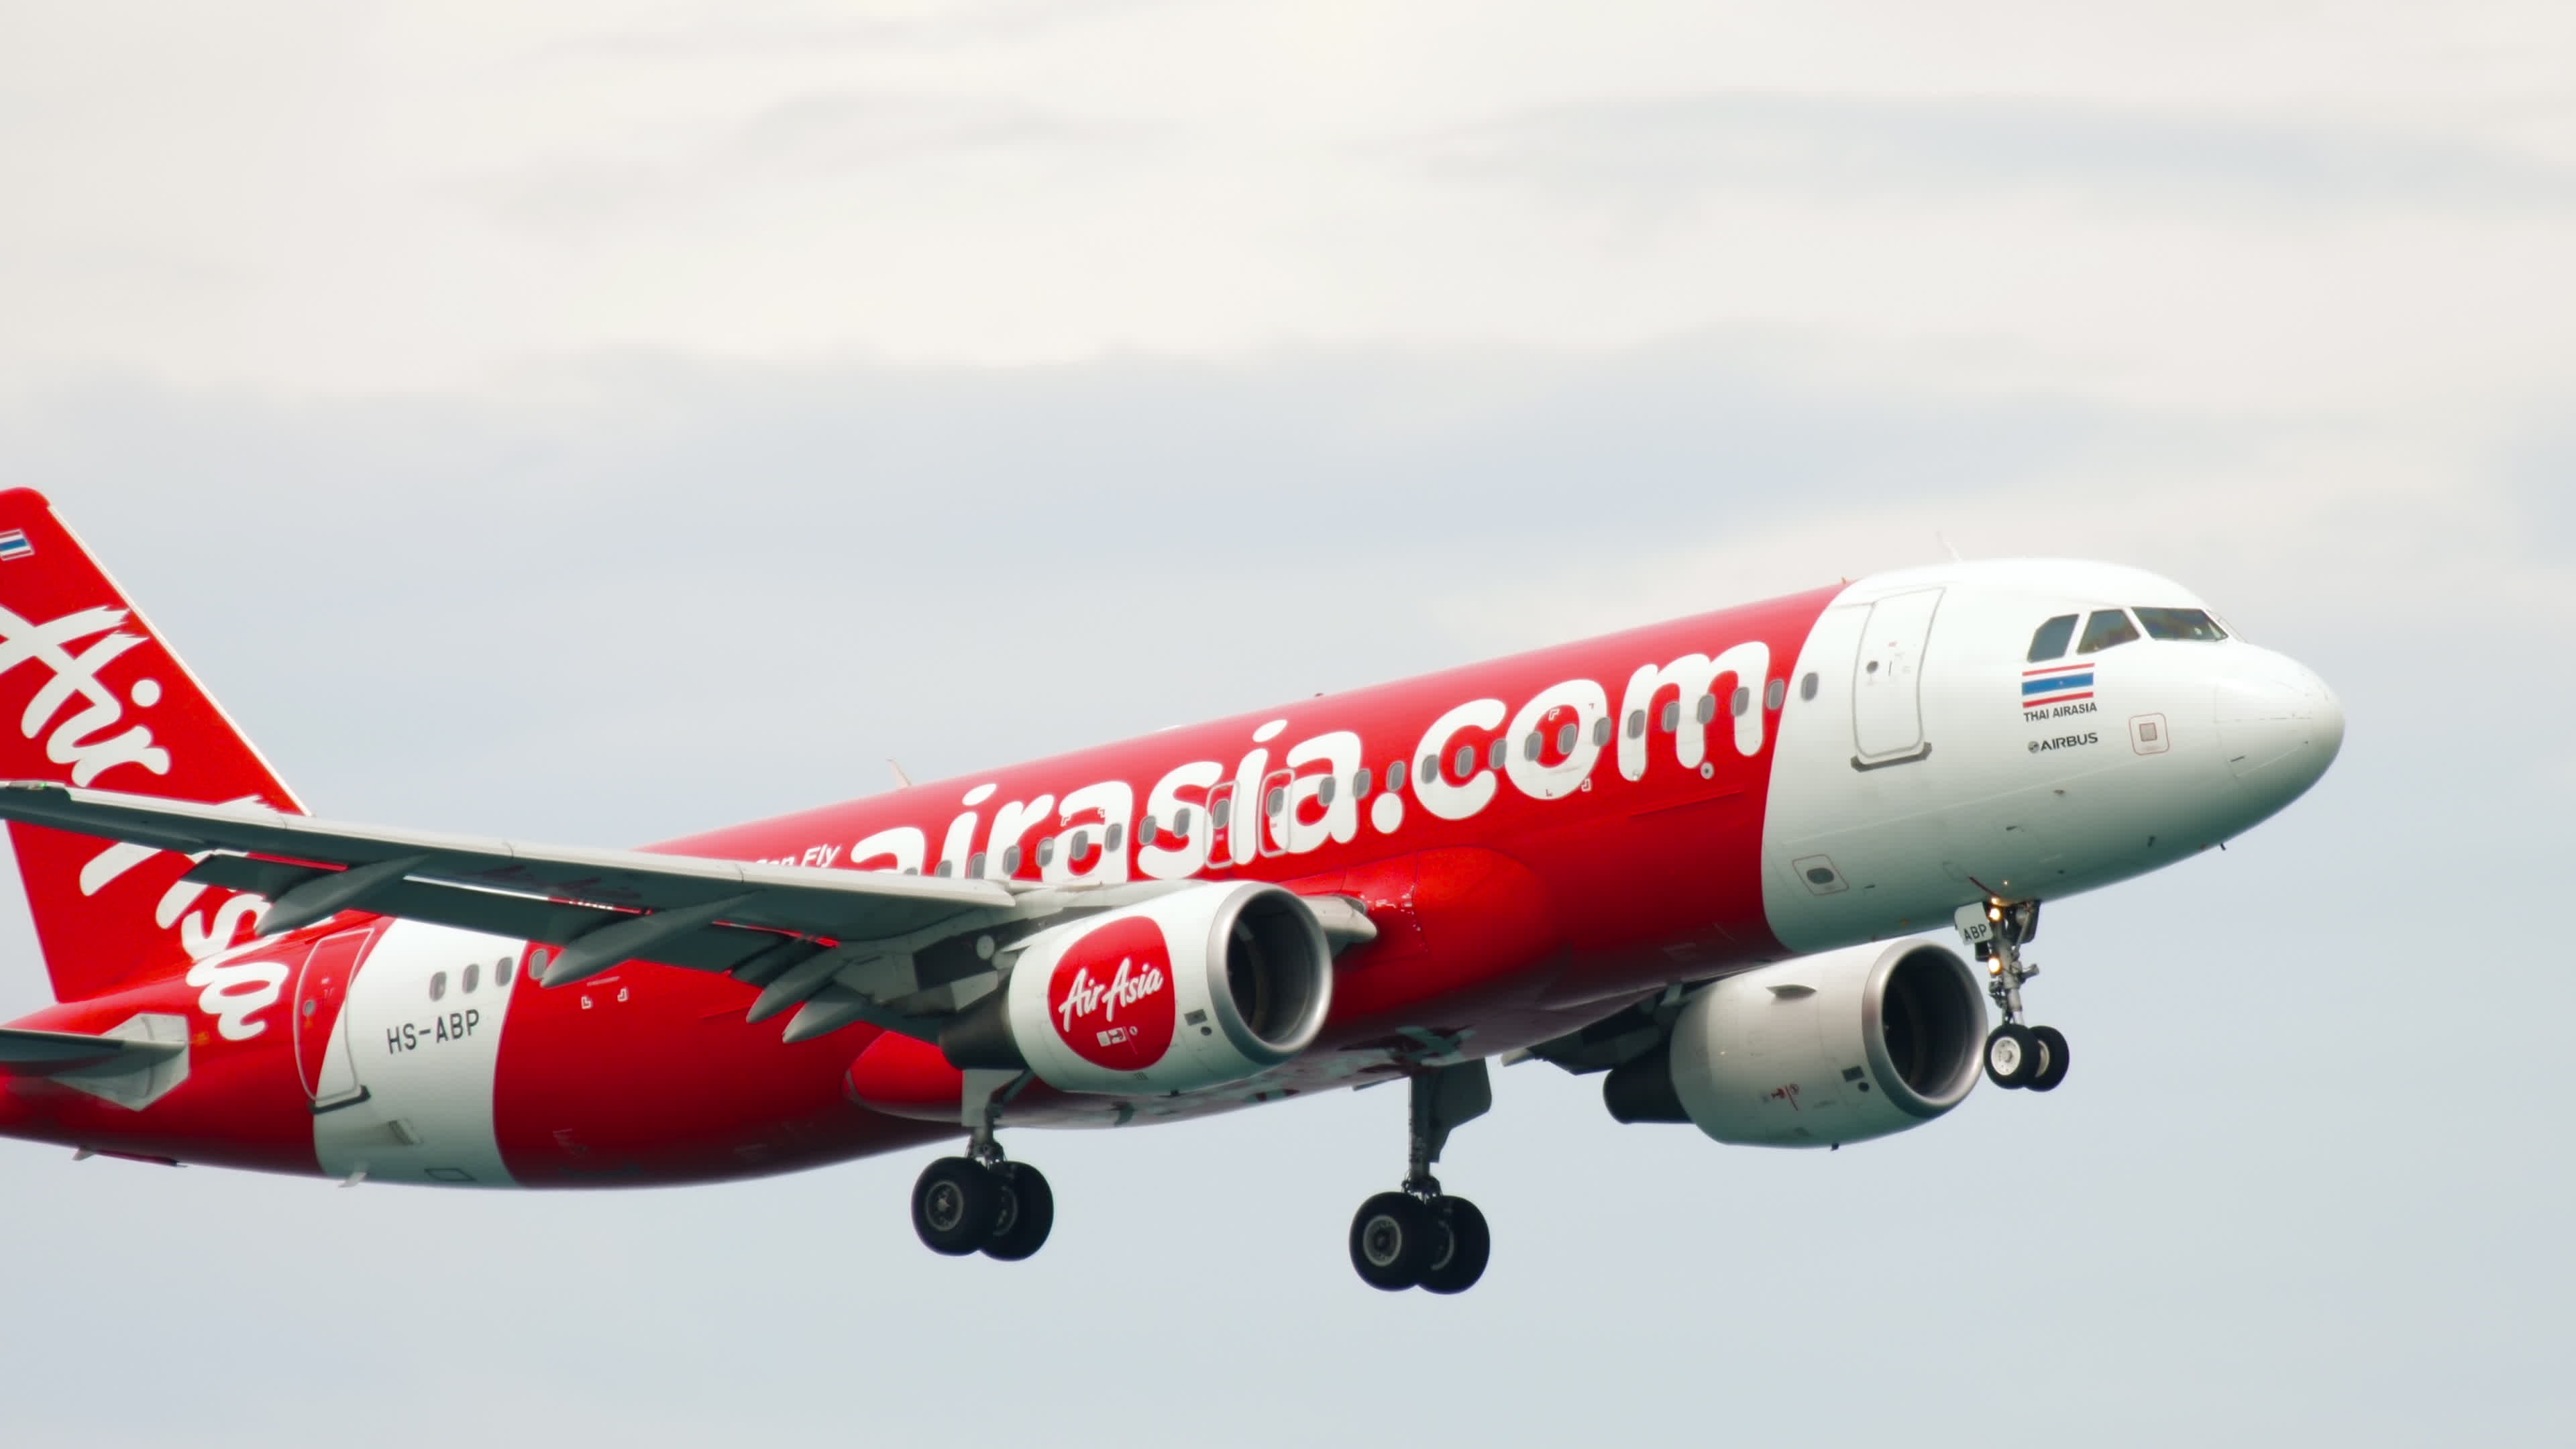 AirAsia Airbus A320, Vibrant livery, Stock footage, Commercial aviation, 3840x2160 4K Desktop